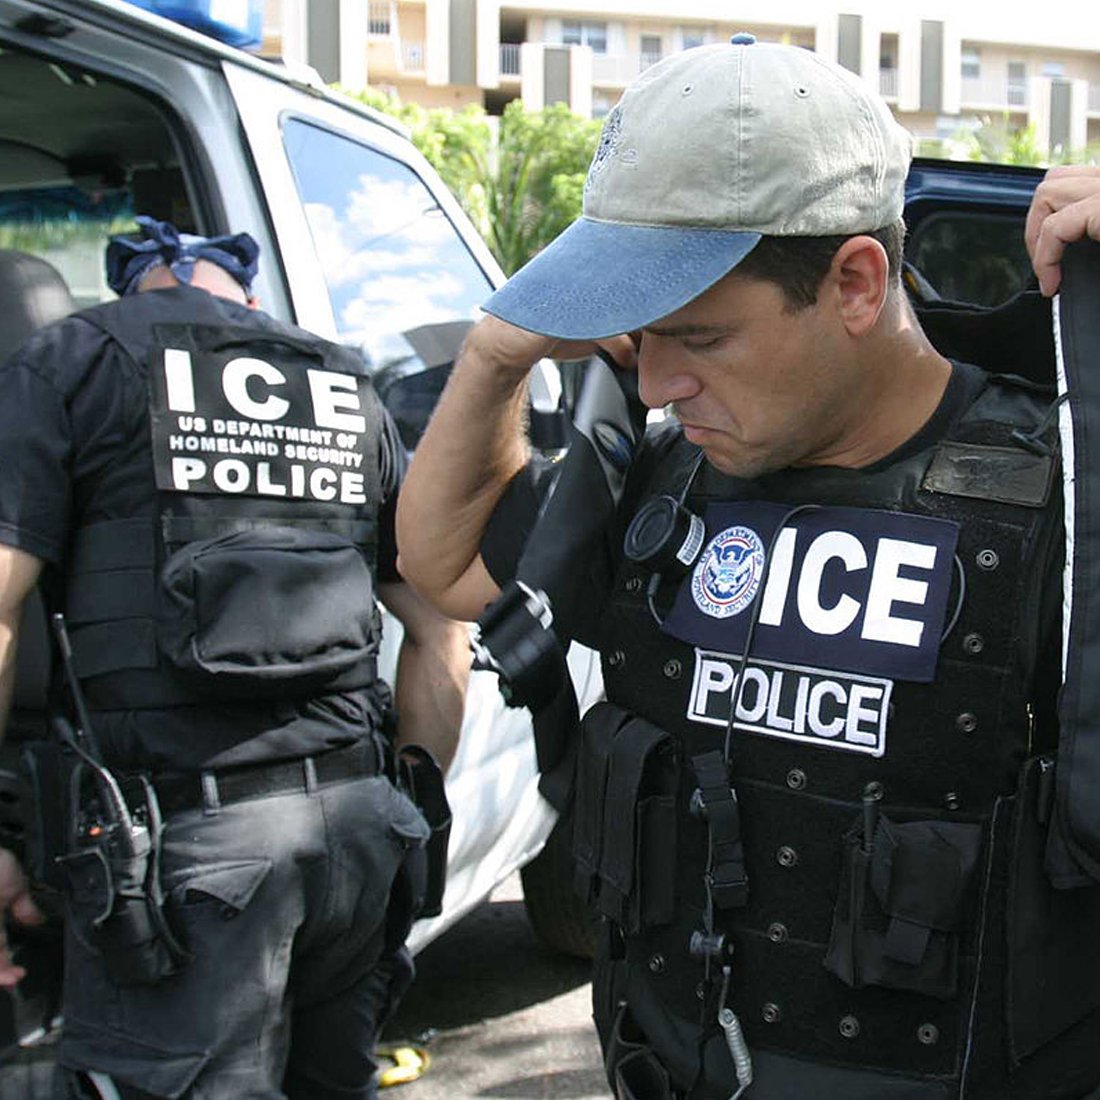 U.S. Agency ICE Conducts Investigations That Exploit Blockchain Activity